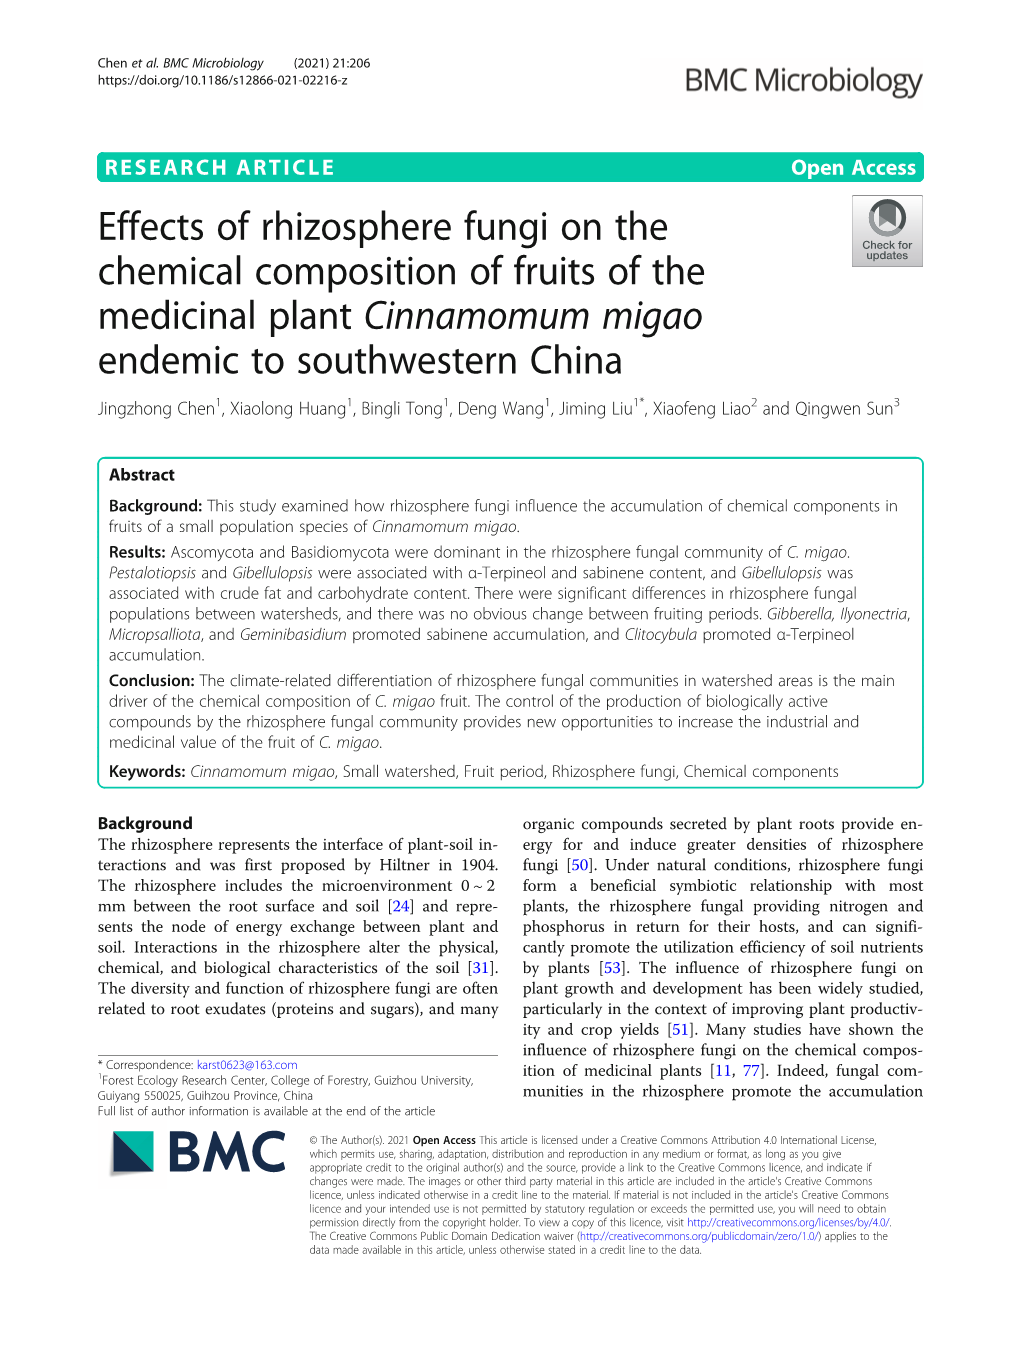 Effects of Rhizosphere Fungi on the Chemical Composition of Fruits of The